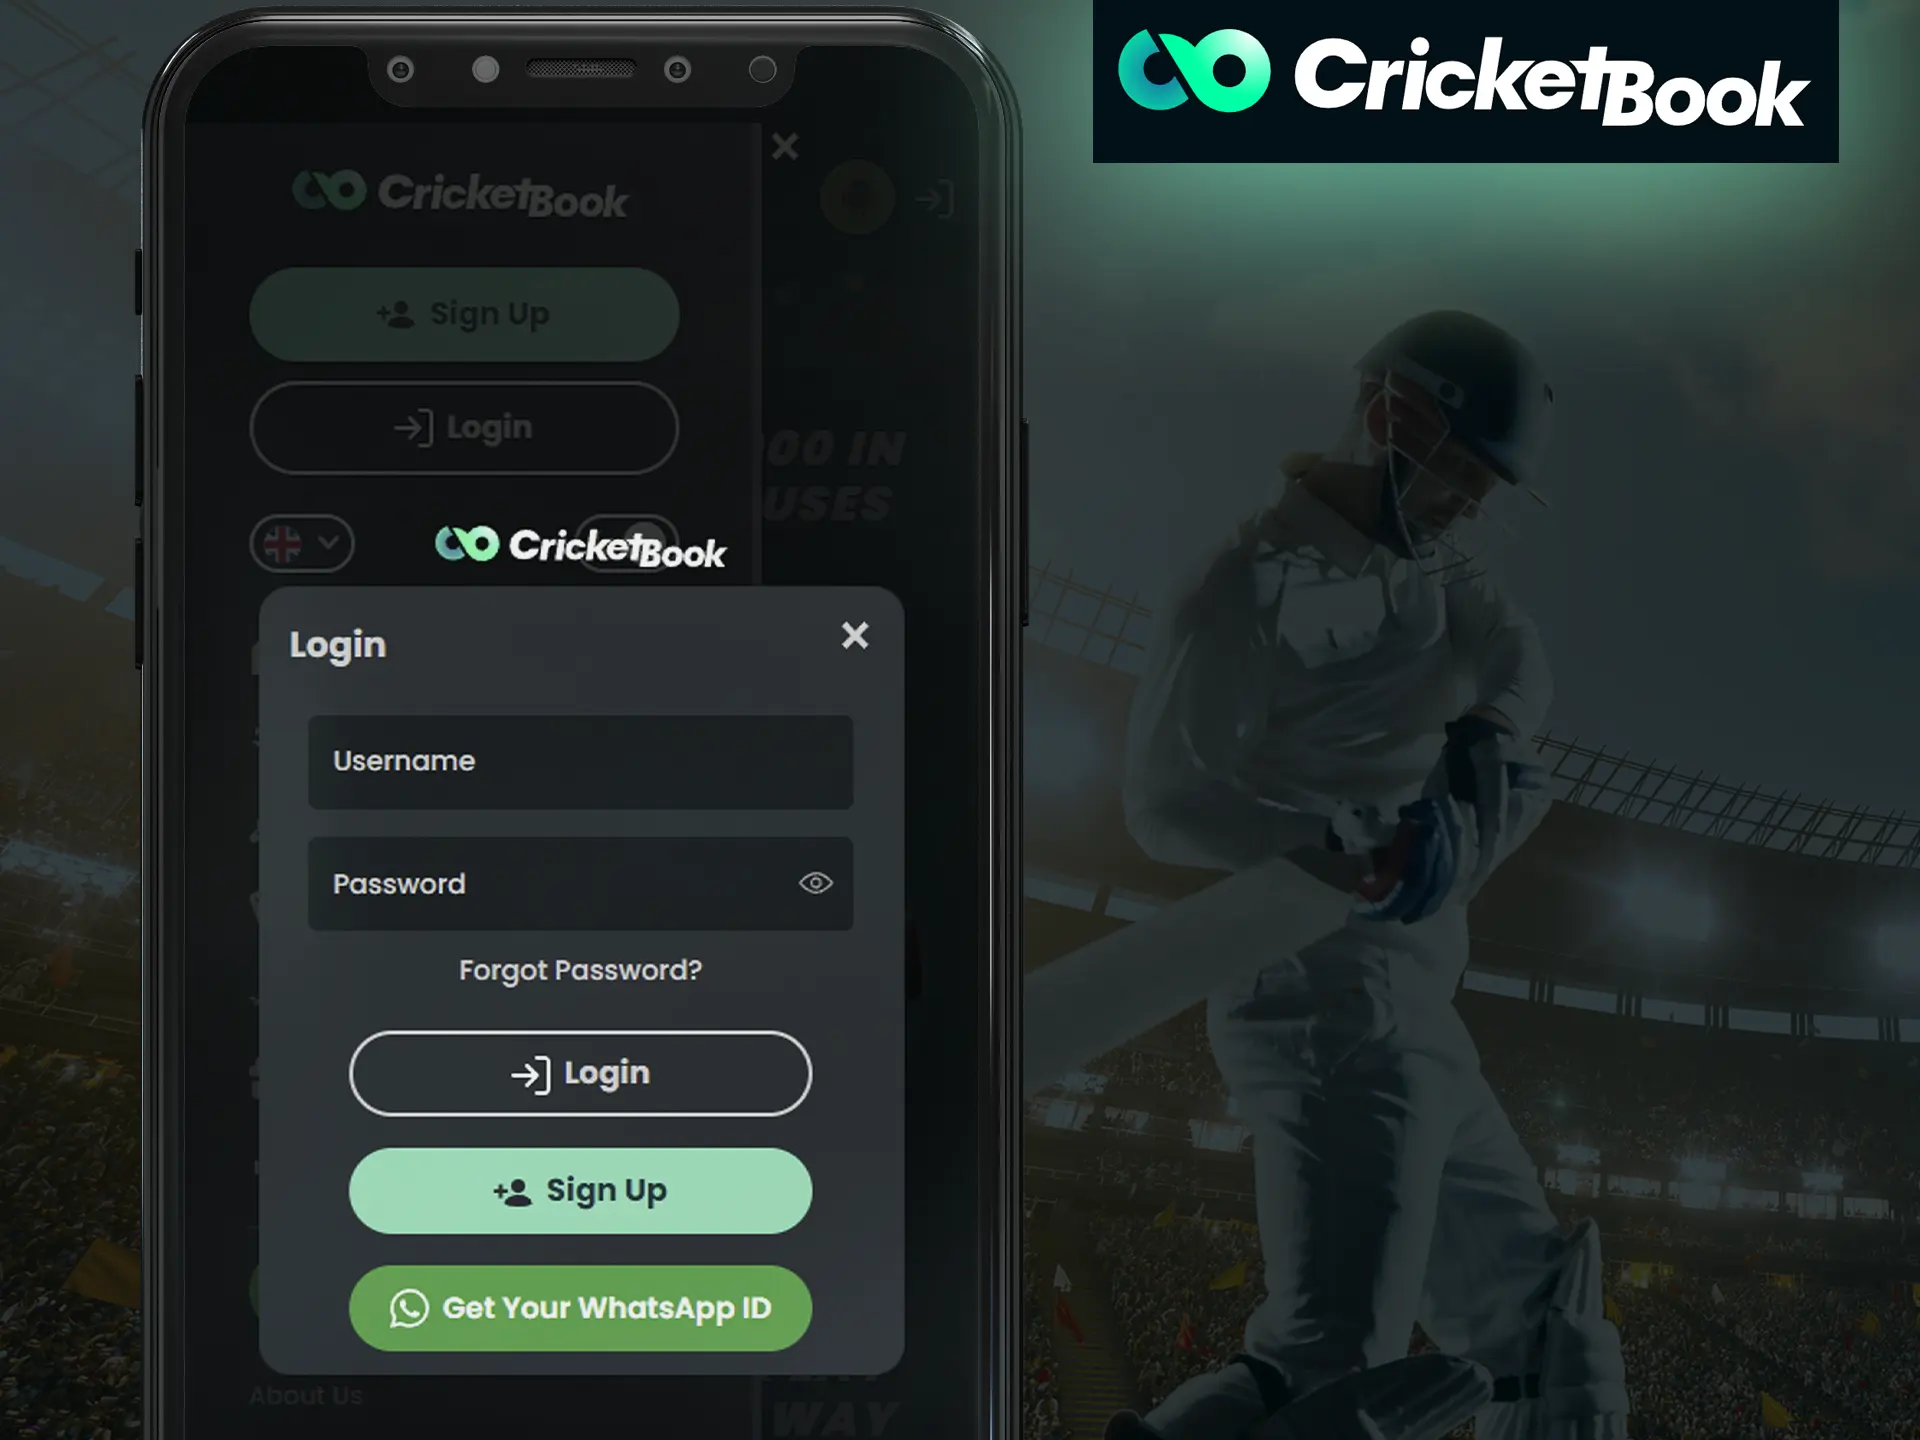 Log into your Cricketbook account.